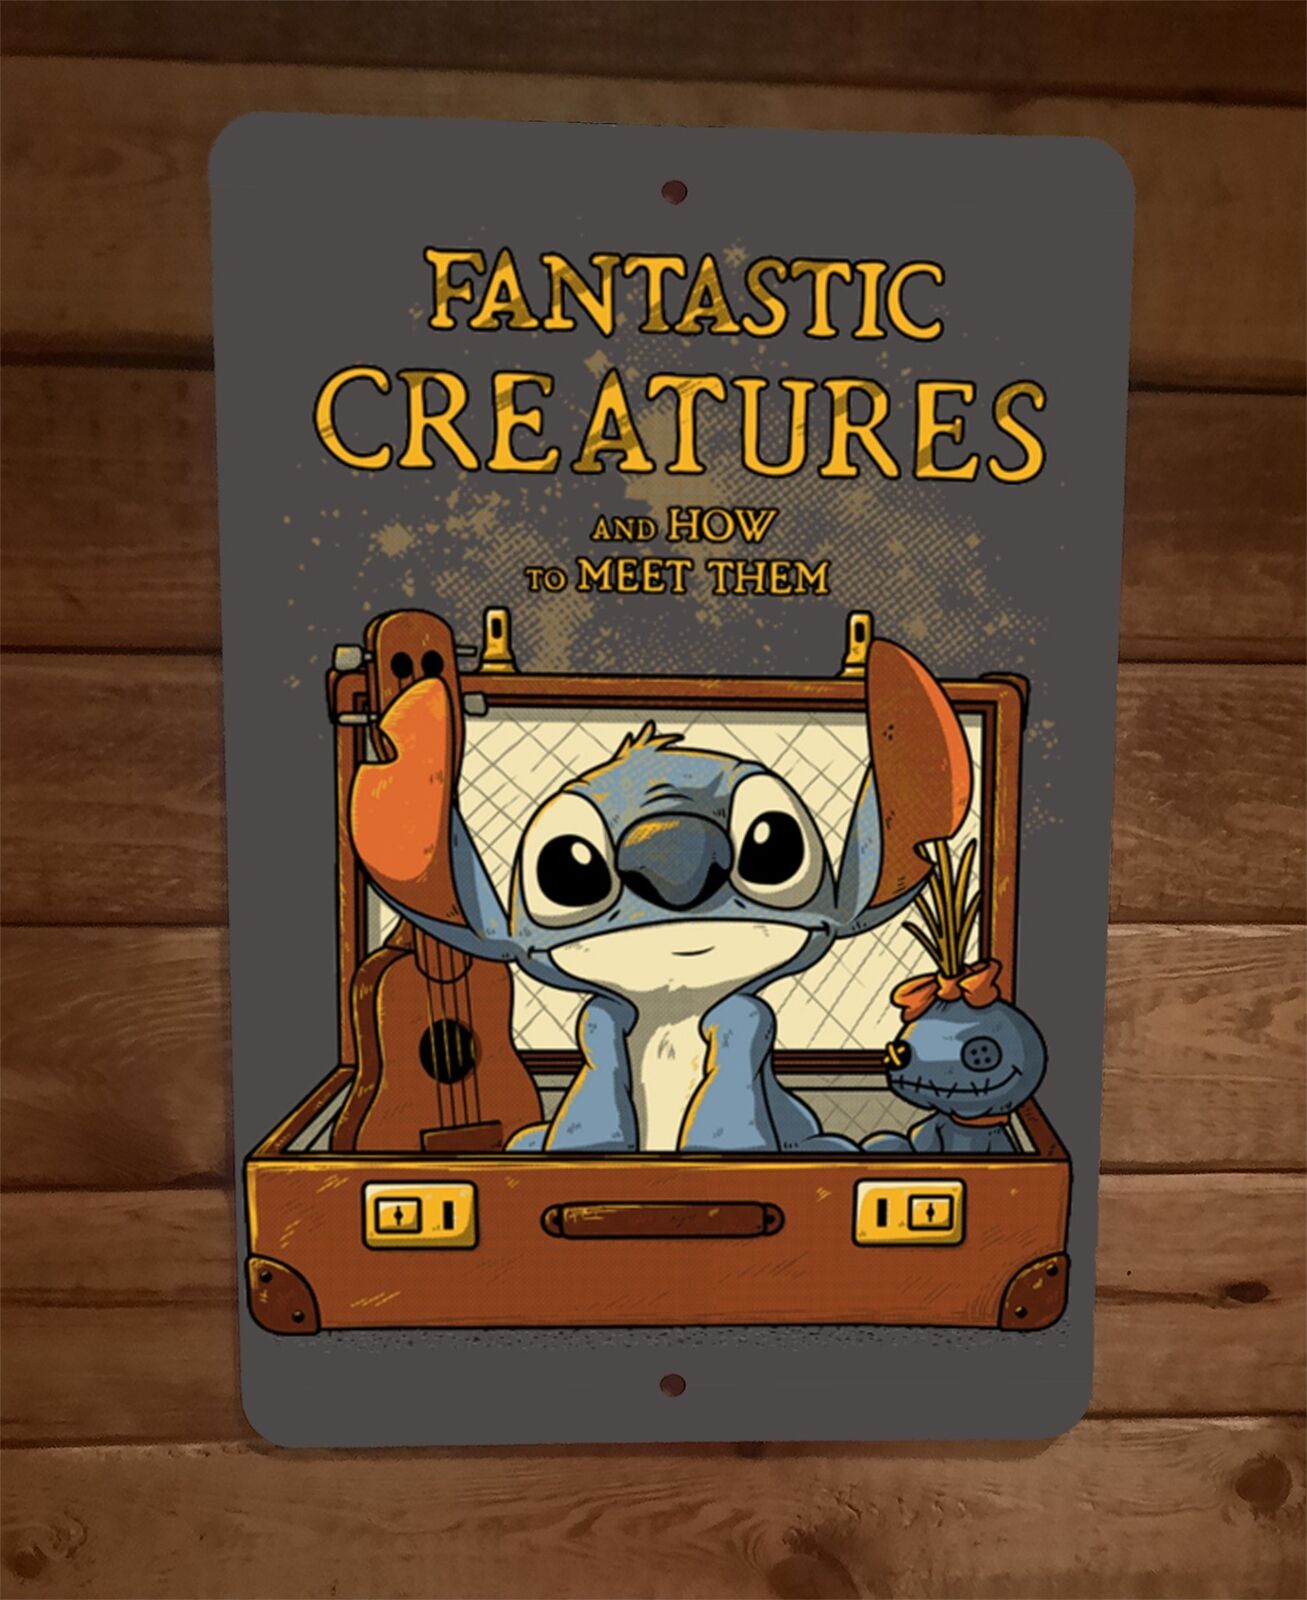 Fantastic Creatures and How to Meet Them 8x12 Metal Wall Sign